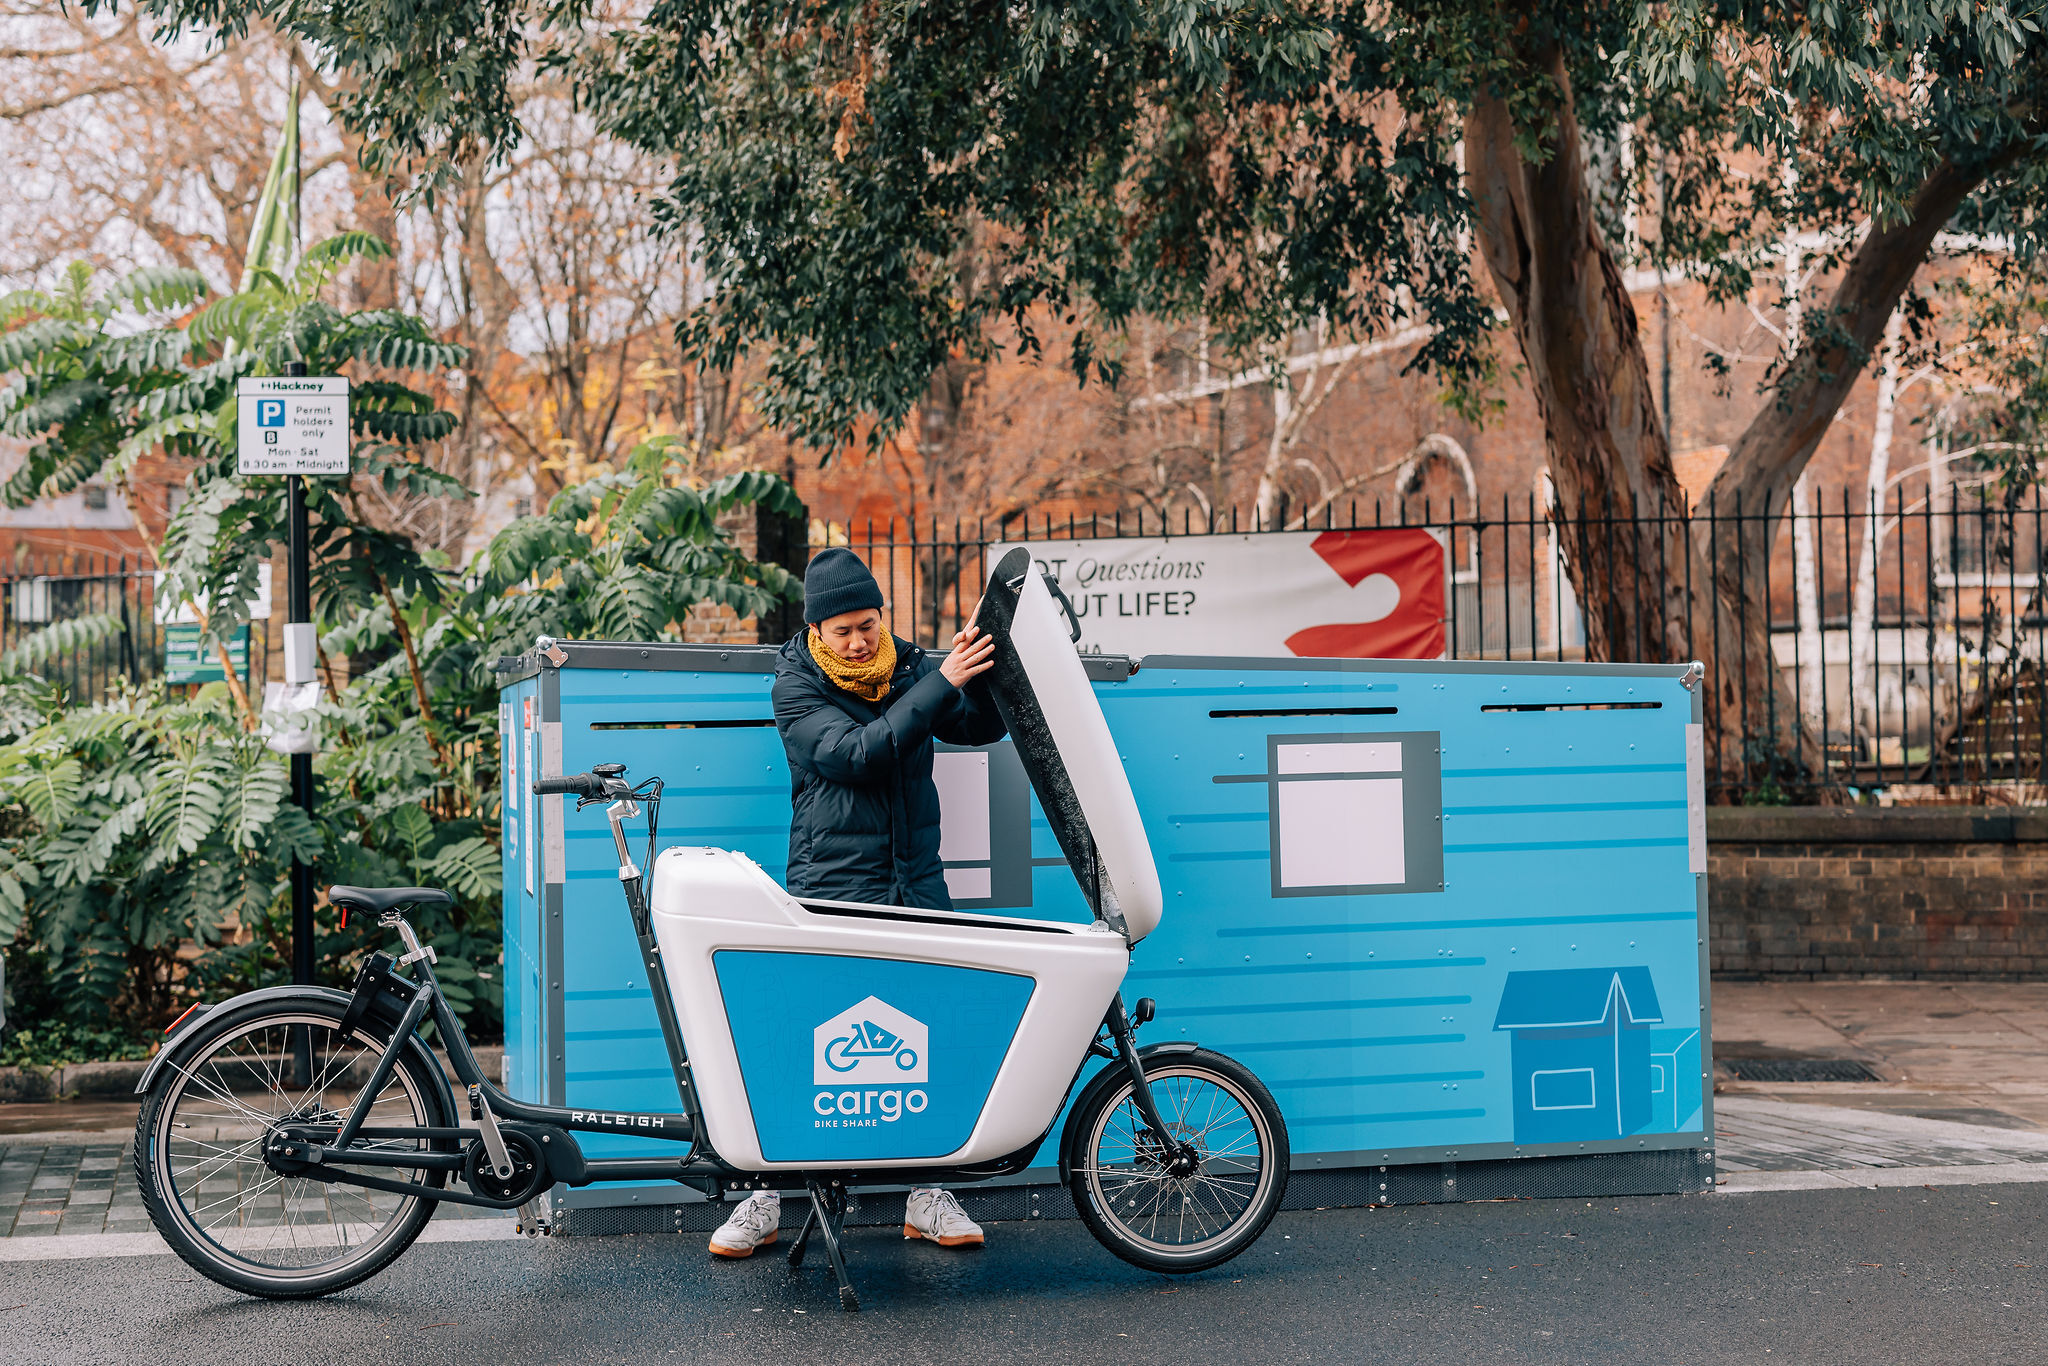 Over 500 miles travelled with UK’s first shared e-cargo bike scheme